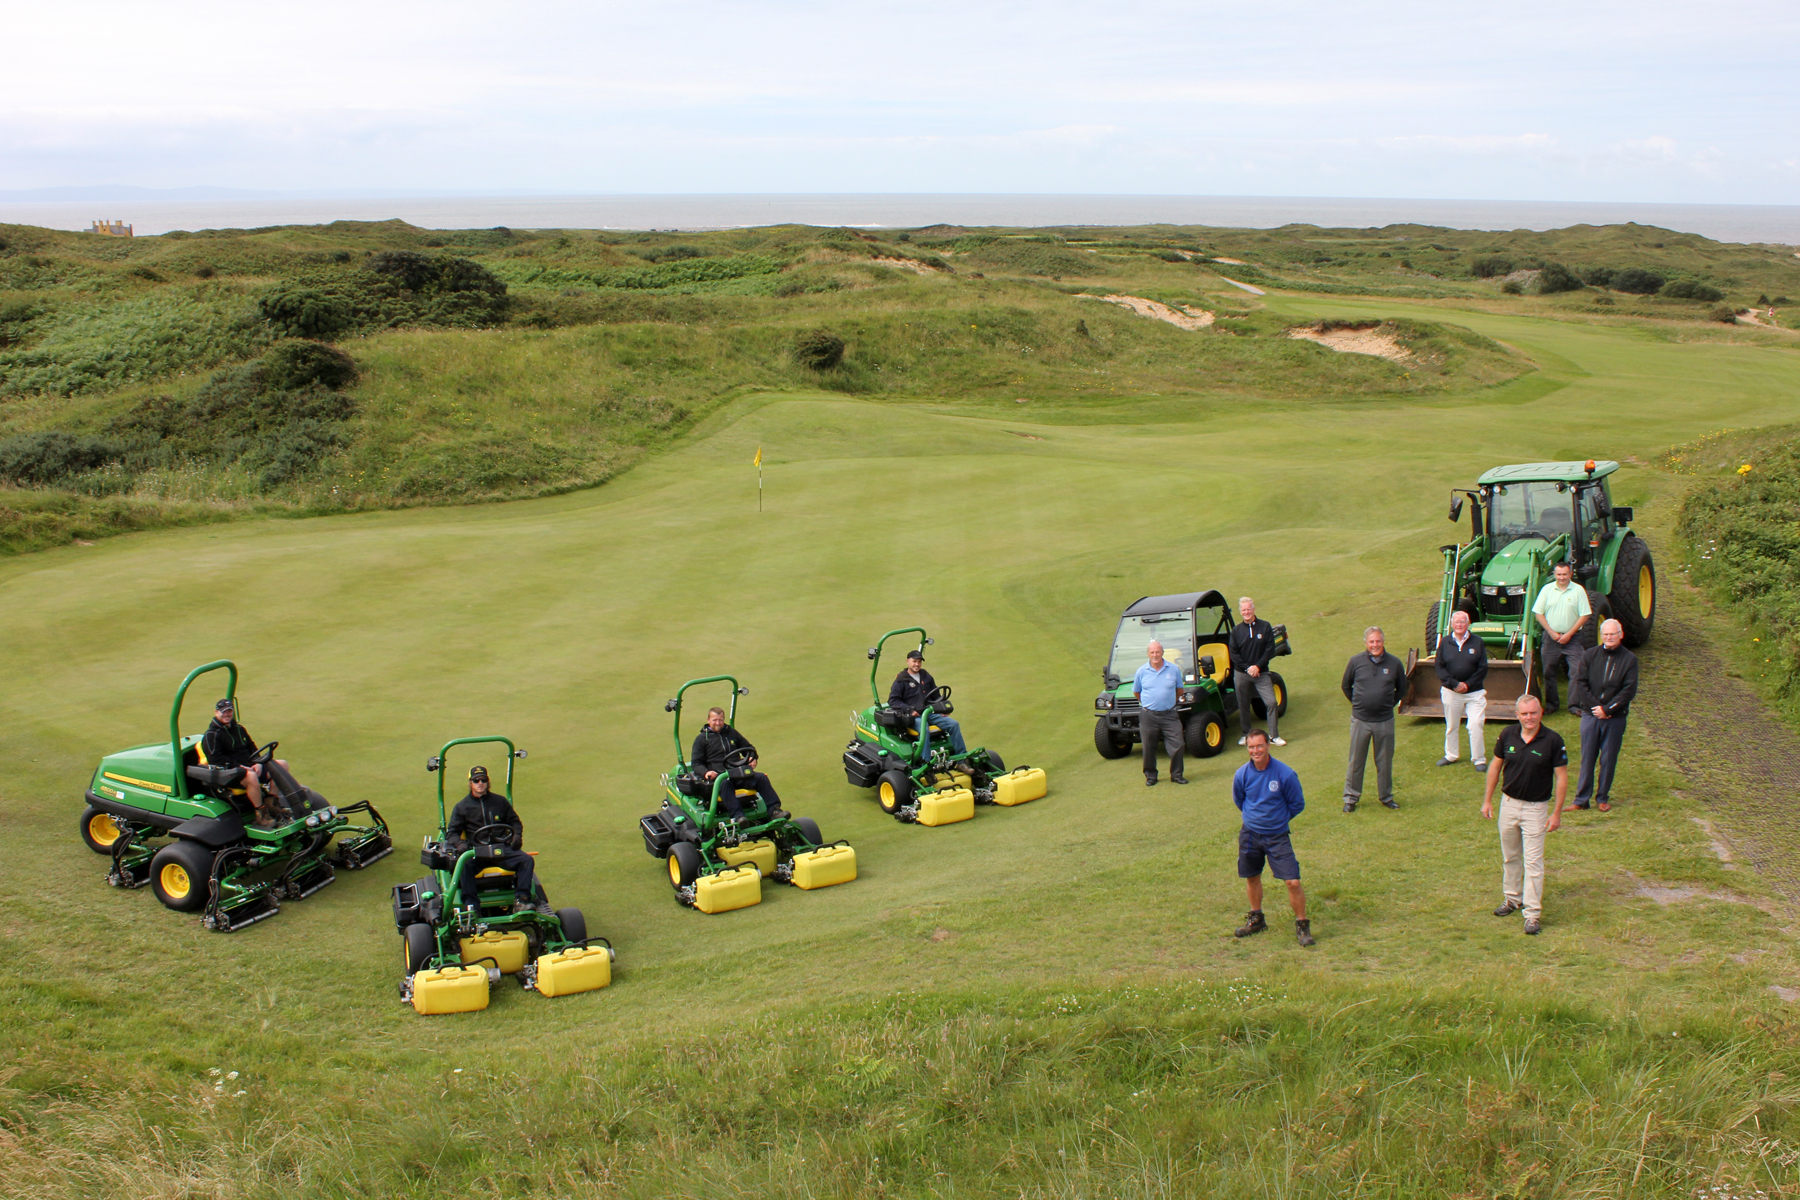 Pyle & Kenfig Golf Club put in the first UK order for three new John Deere 2750E hybrid electric triplex mowers, supplied by local dealer Powercut.